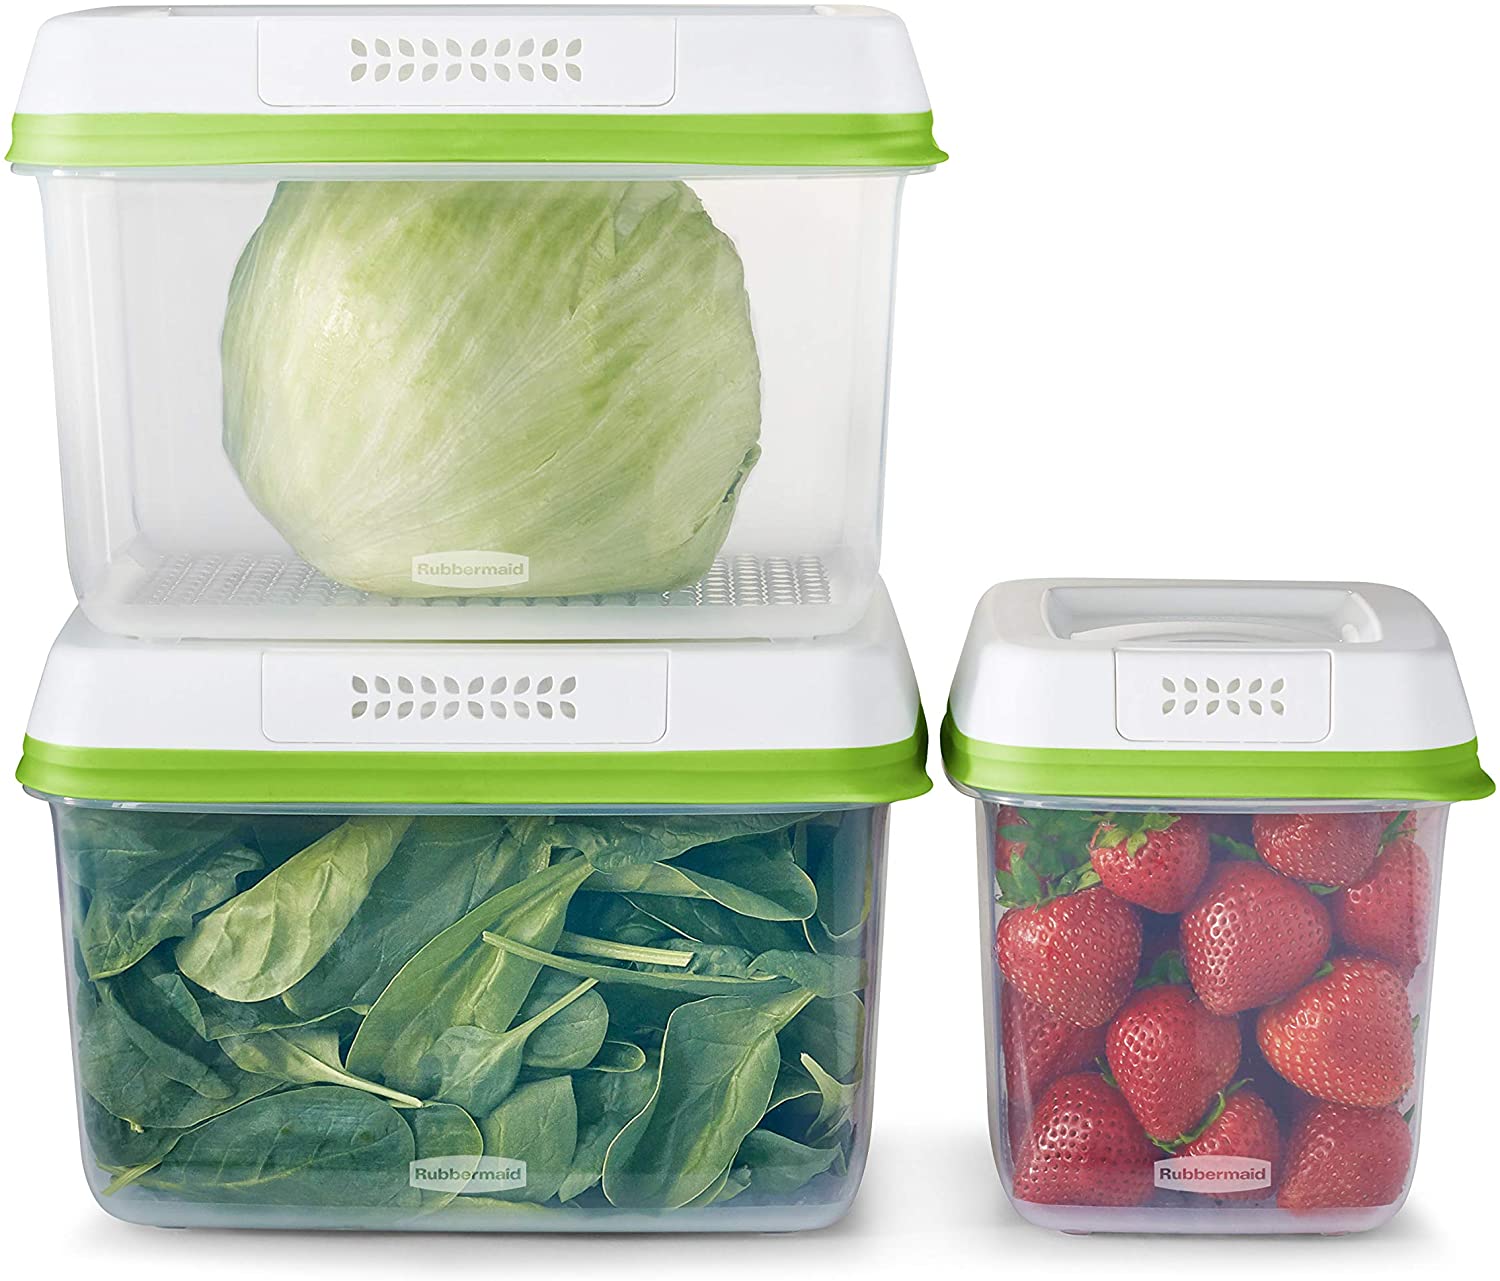 6-Piece Rubbermaid FreshWorks Produce Saver Containers (Medium/Large) $18.40 + Free Shipping w/ Prime or $25+